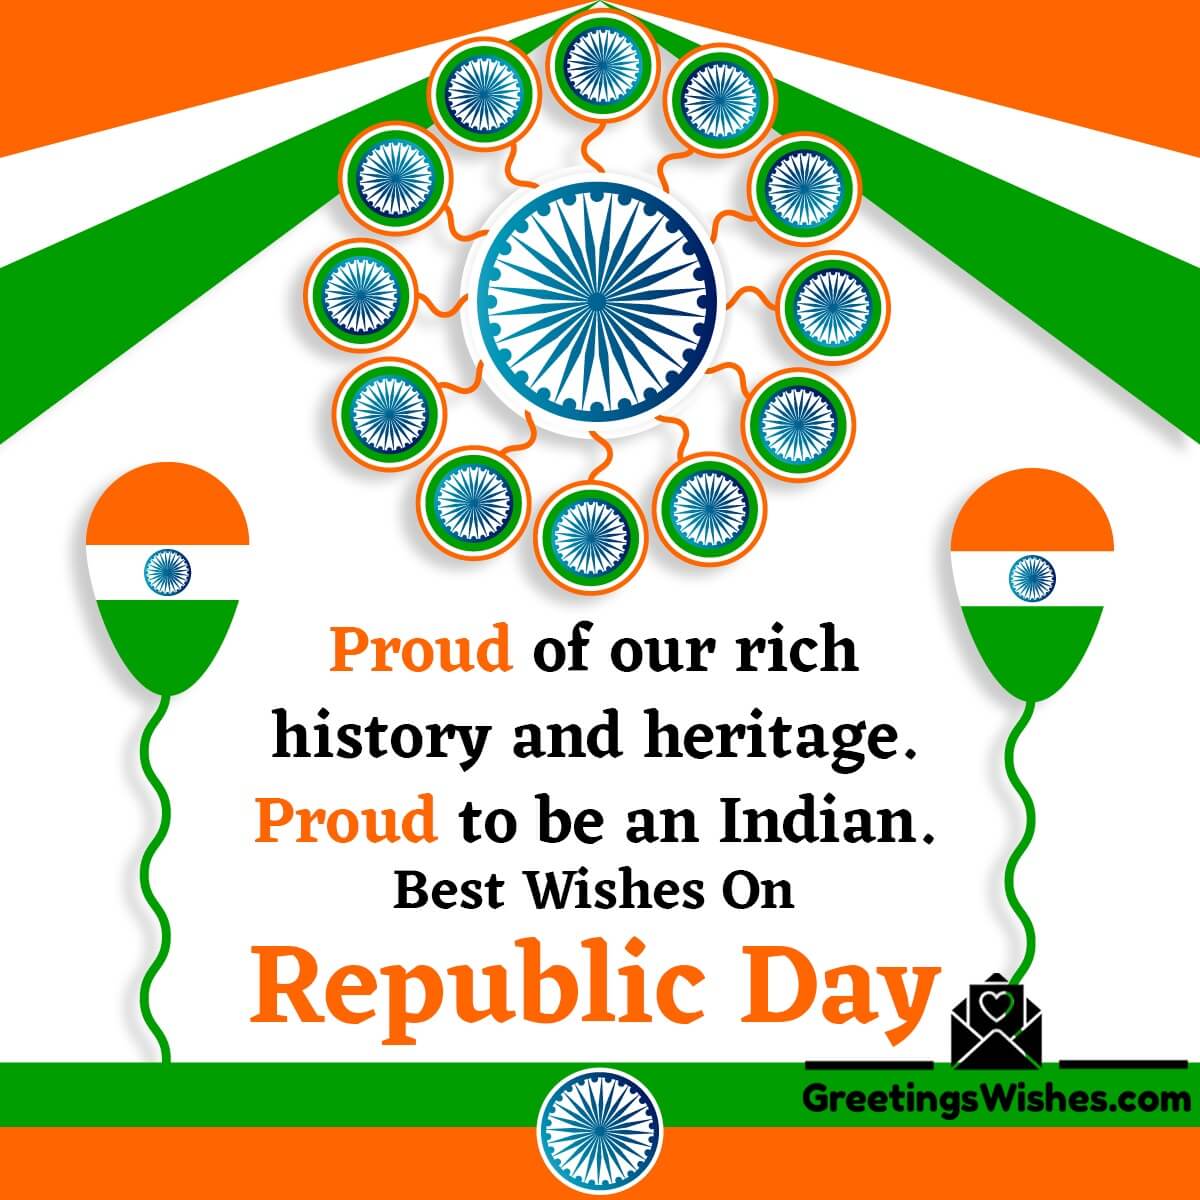 Best Wishes On Republic Day